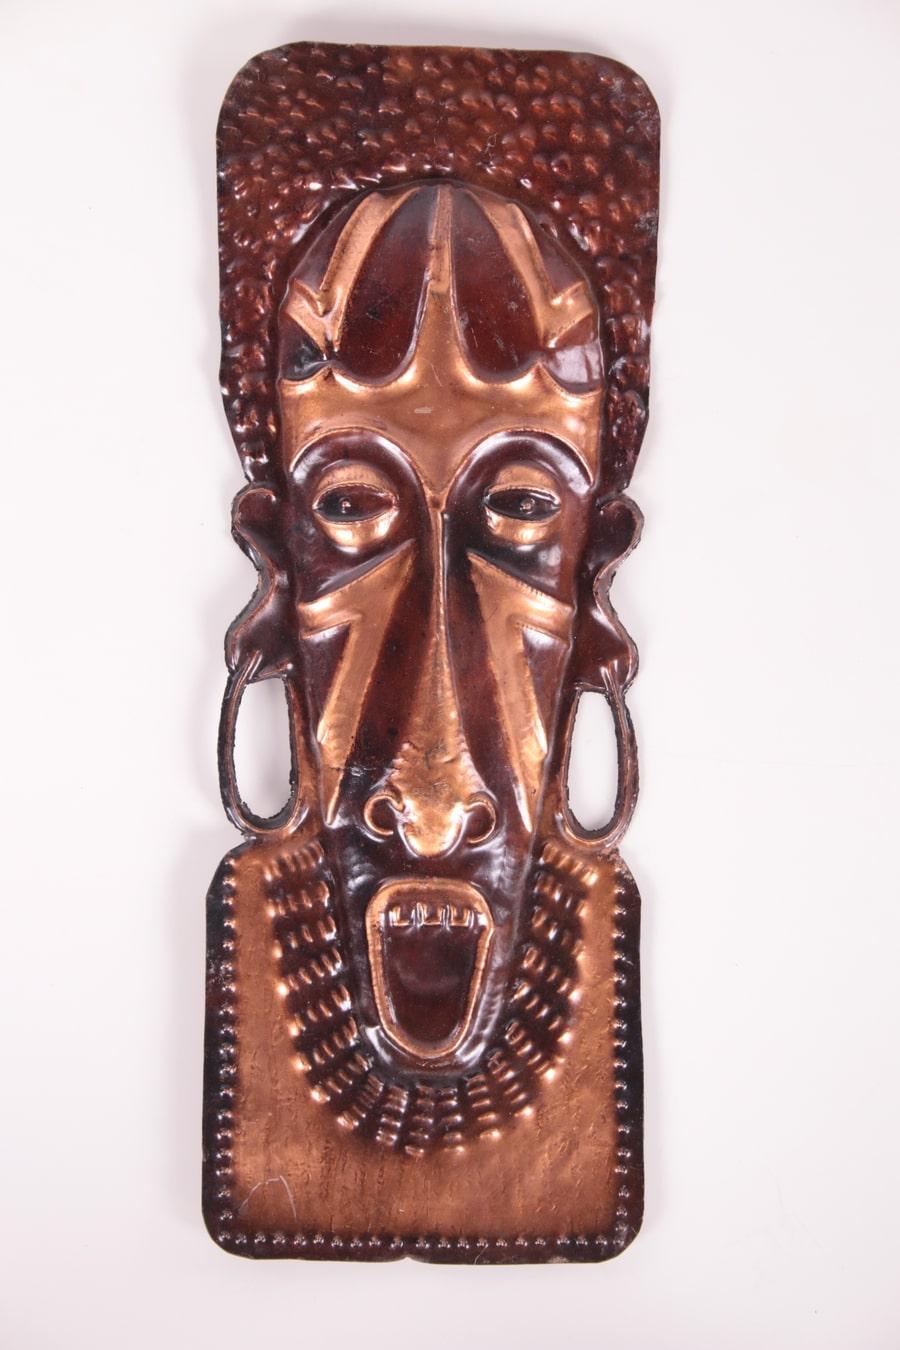 Vintage African handmade copper wall masks from the 60s to the 70s

Set of hanging beaten African wall masks made of copper found in Denmark.

Made in the 1960s and 1970s when African was widely used to decorate homes and to bring the warmth of